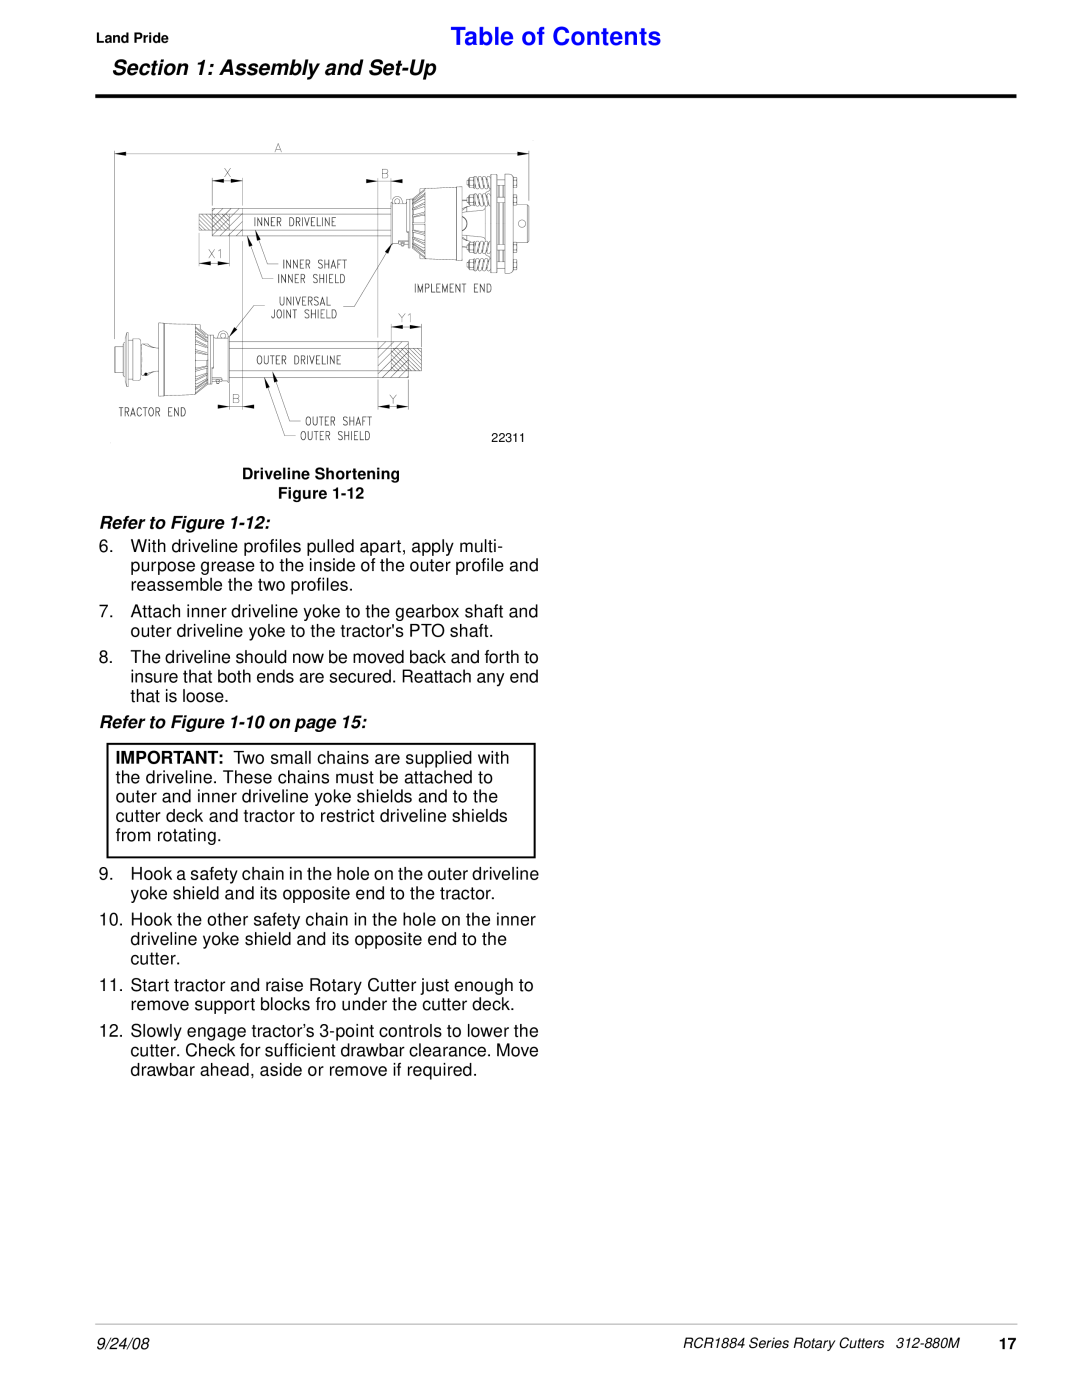 Land Pride RCR1884 manual Table of Contents, Assembly and Set-Up, Refer to Figure, Refer to -10on page 